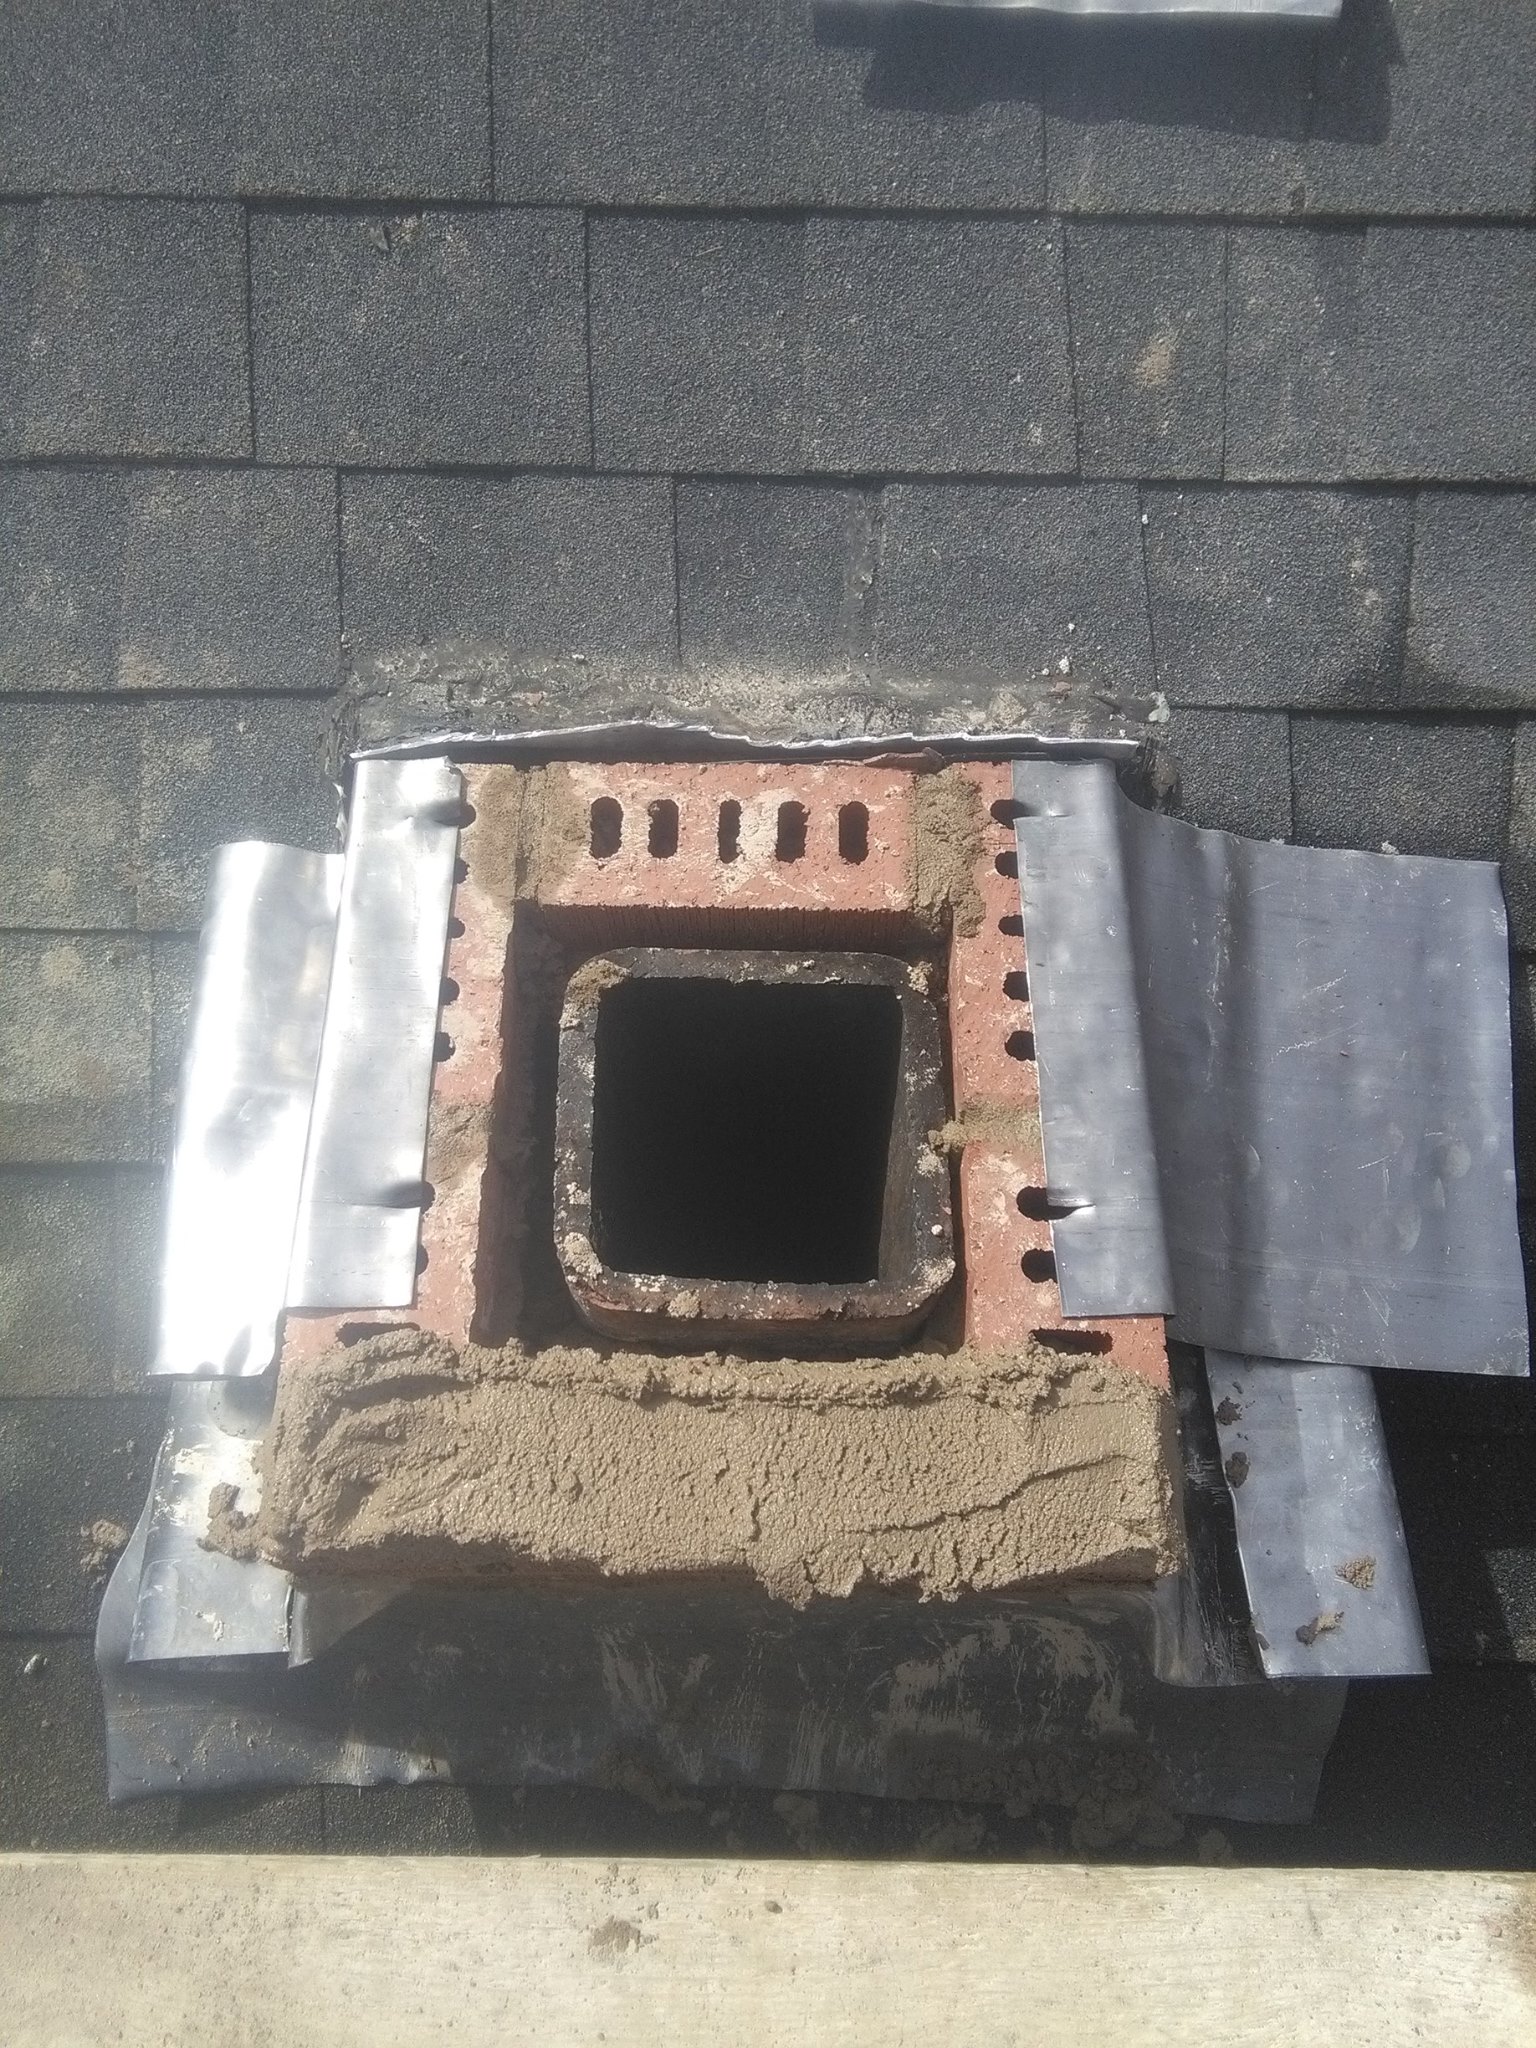 image of chimney construction services completed in Fall River, NS by Pro Chimney Services based in Halifax, NS servicing all of the Halifax-Dartmouth Regional Municipality, Bedford, Sackville, Mount Uniacke, Windsor, Hantsport , Wolfville, Kentville, Chester, Mahone Bay, Lunenburg, Bridgewater, Liverpool, Fall River, Wellington, Enfield, Elmsdale, Brookfield, Truro, Musquodoboit Harbour & surrounding areas.